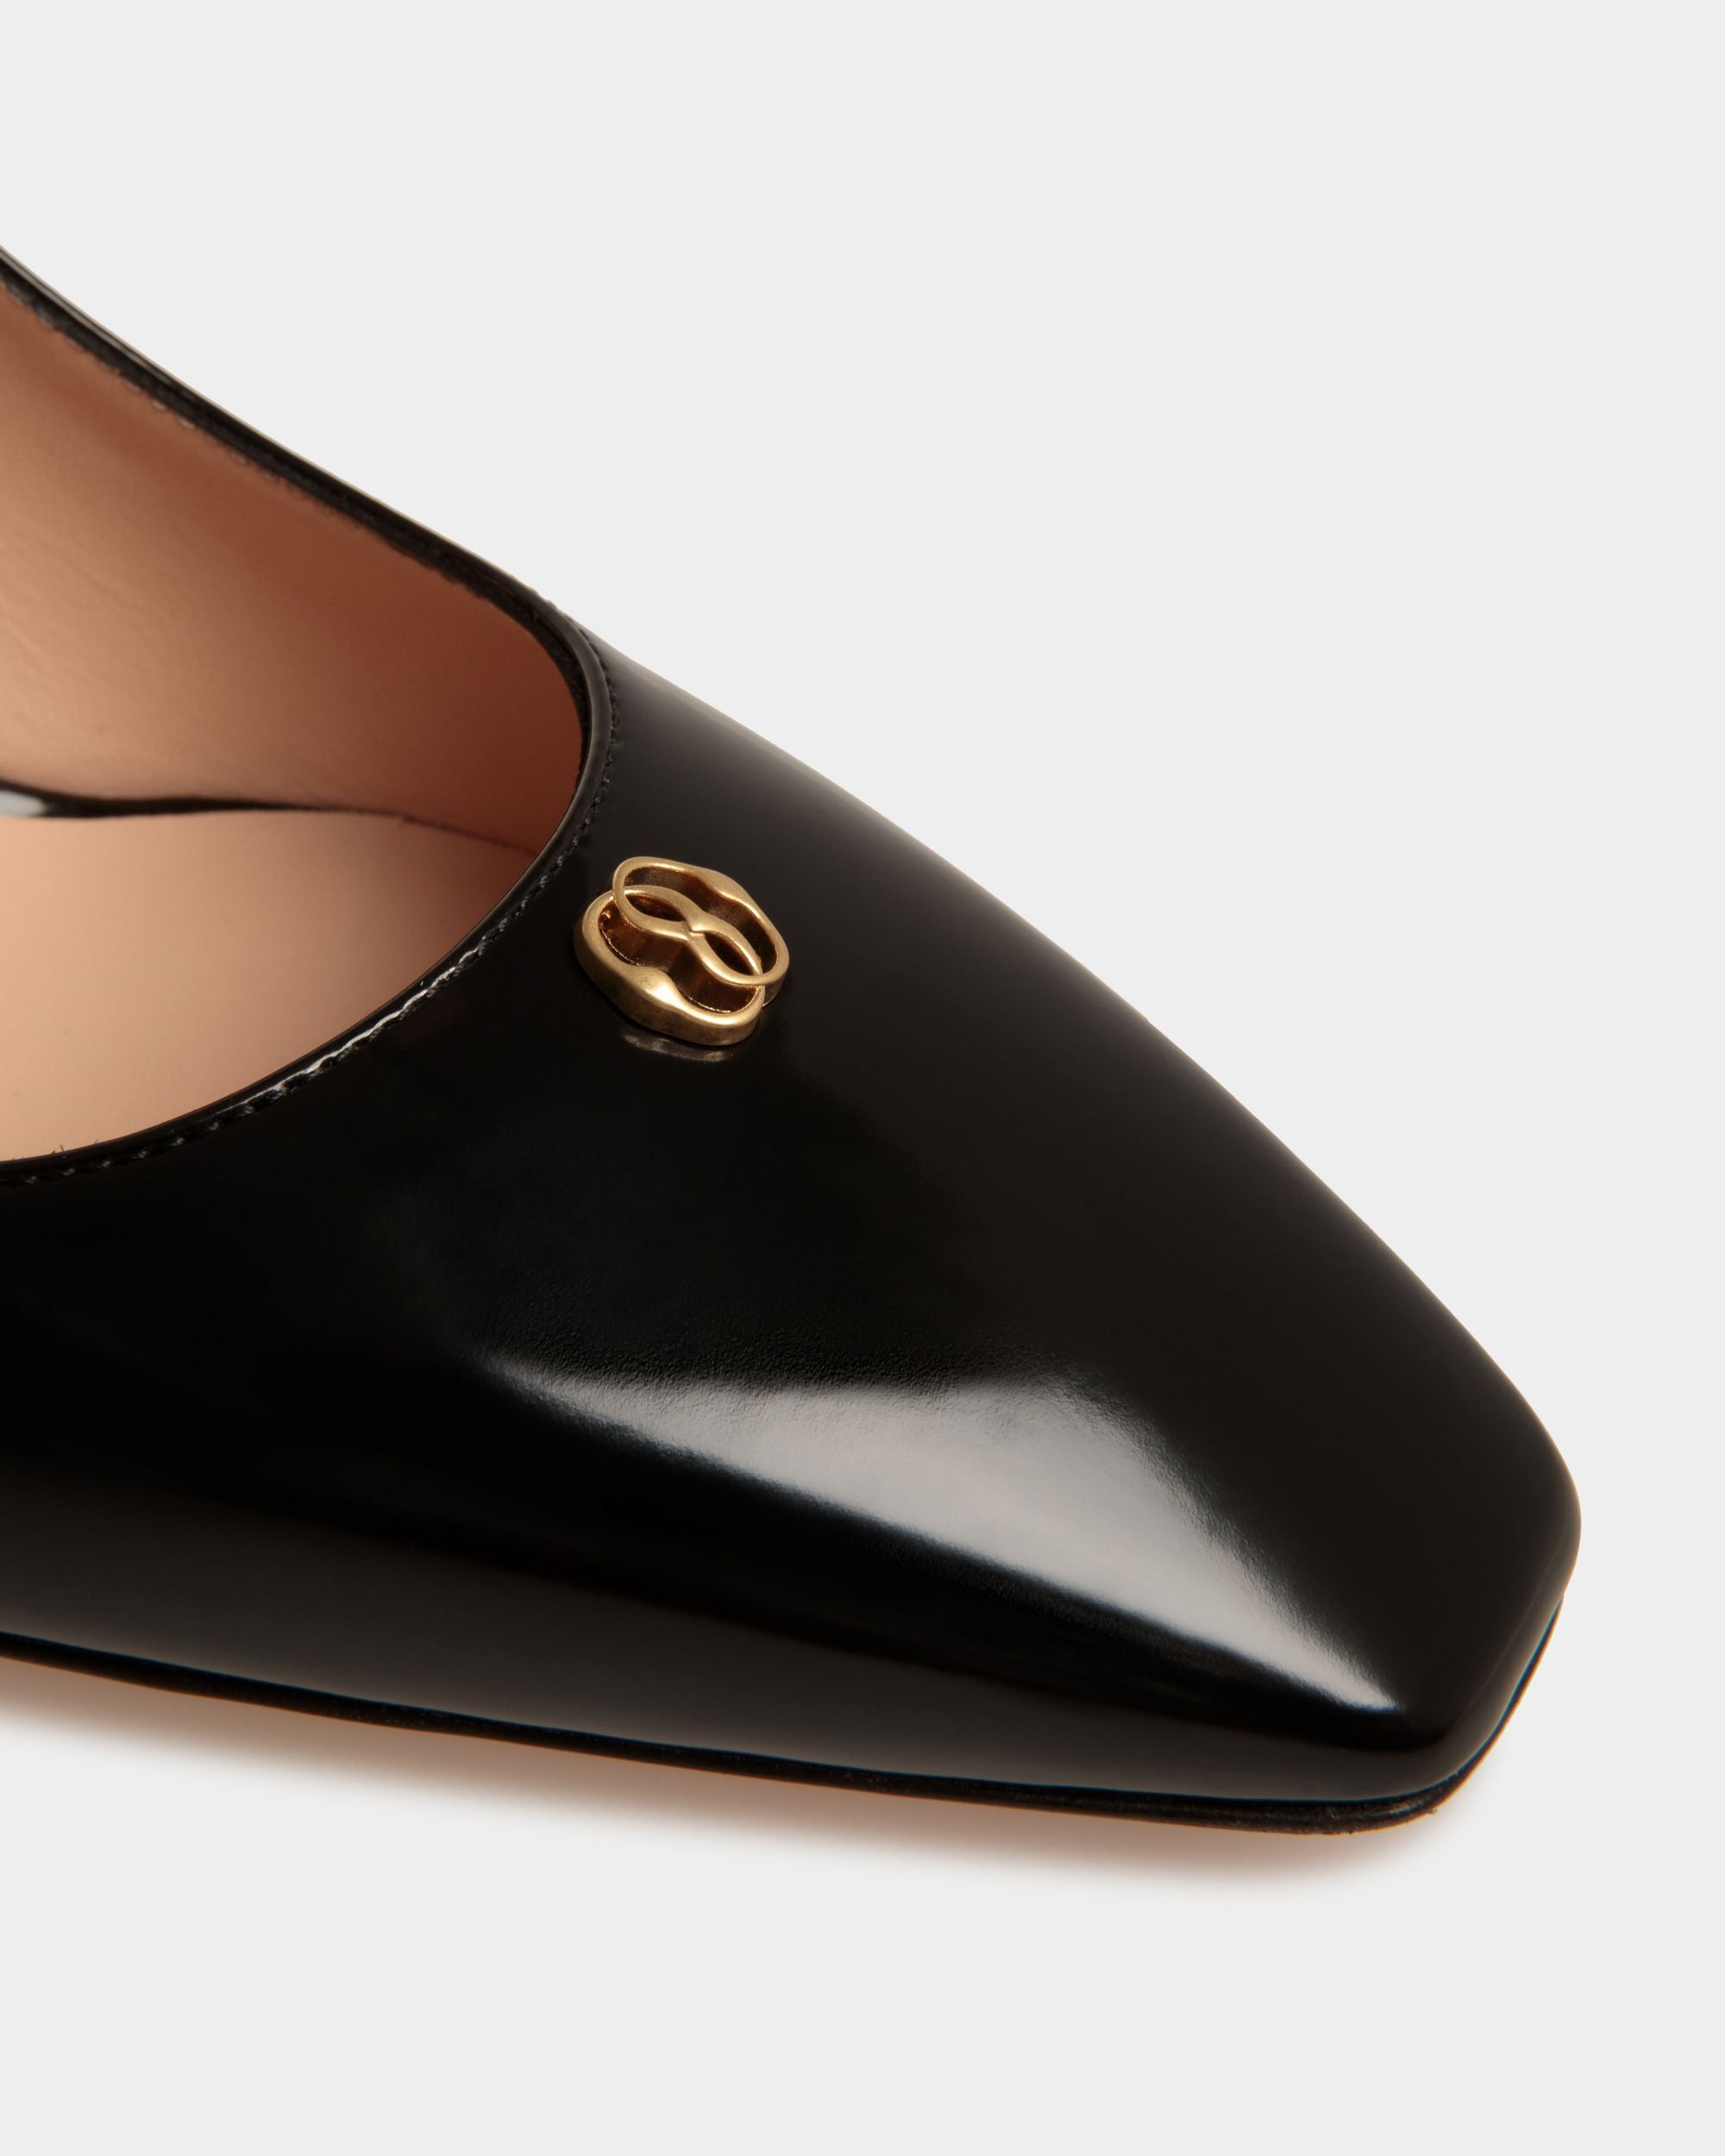 Sylt | Women's Pump in Black Leather | Bally | Still Life Detail